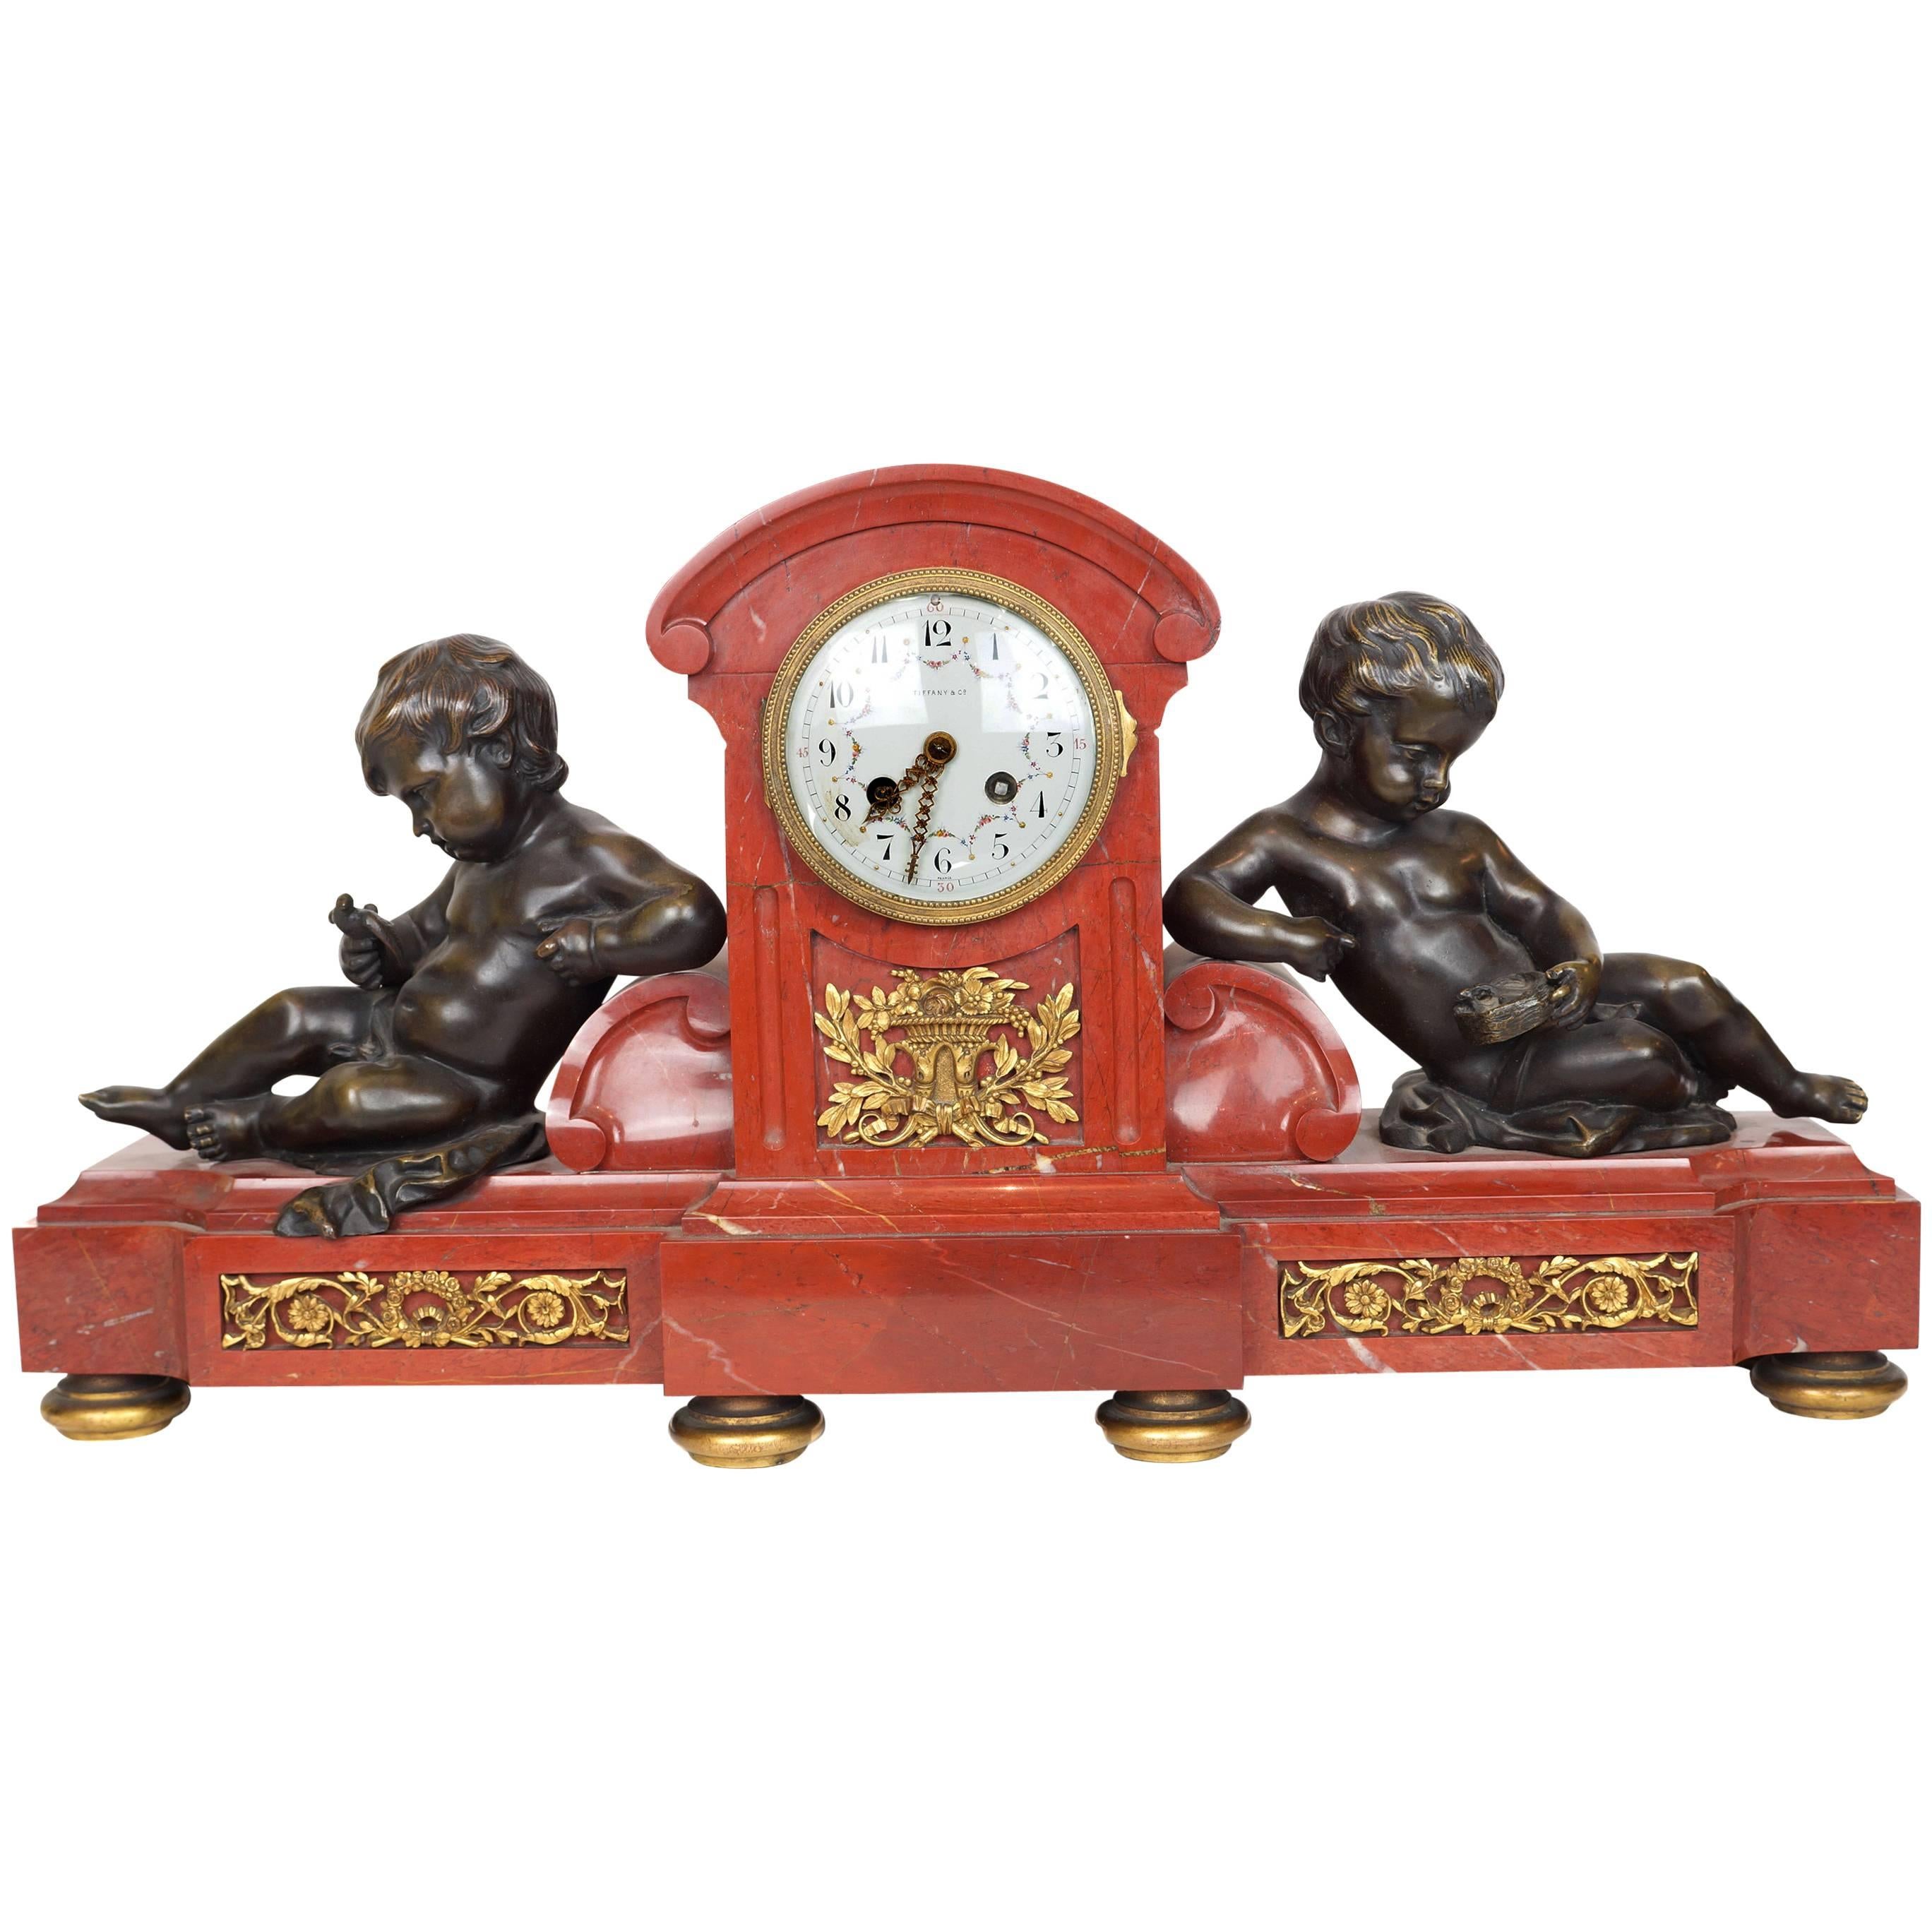 Rouge Marble and Bronze Mantel Clock by Tiffany and Company with Seated Putti